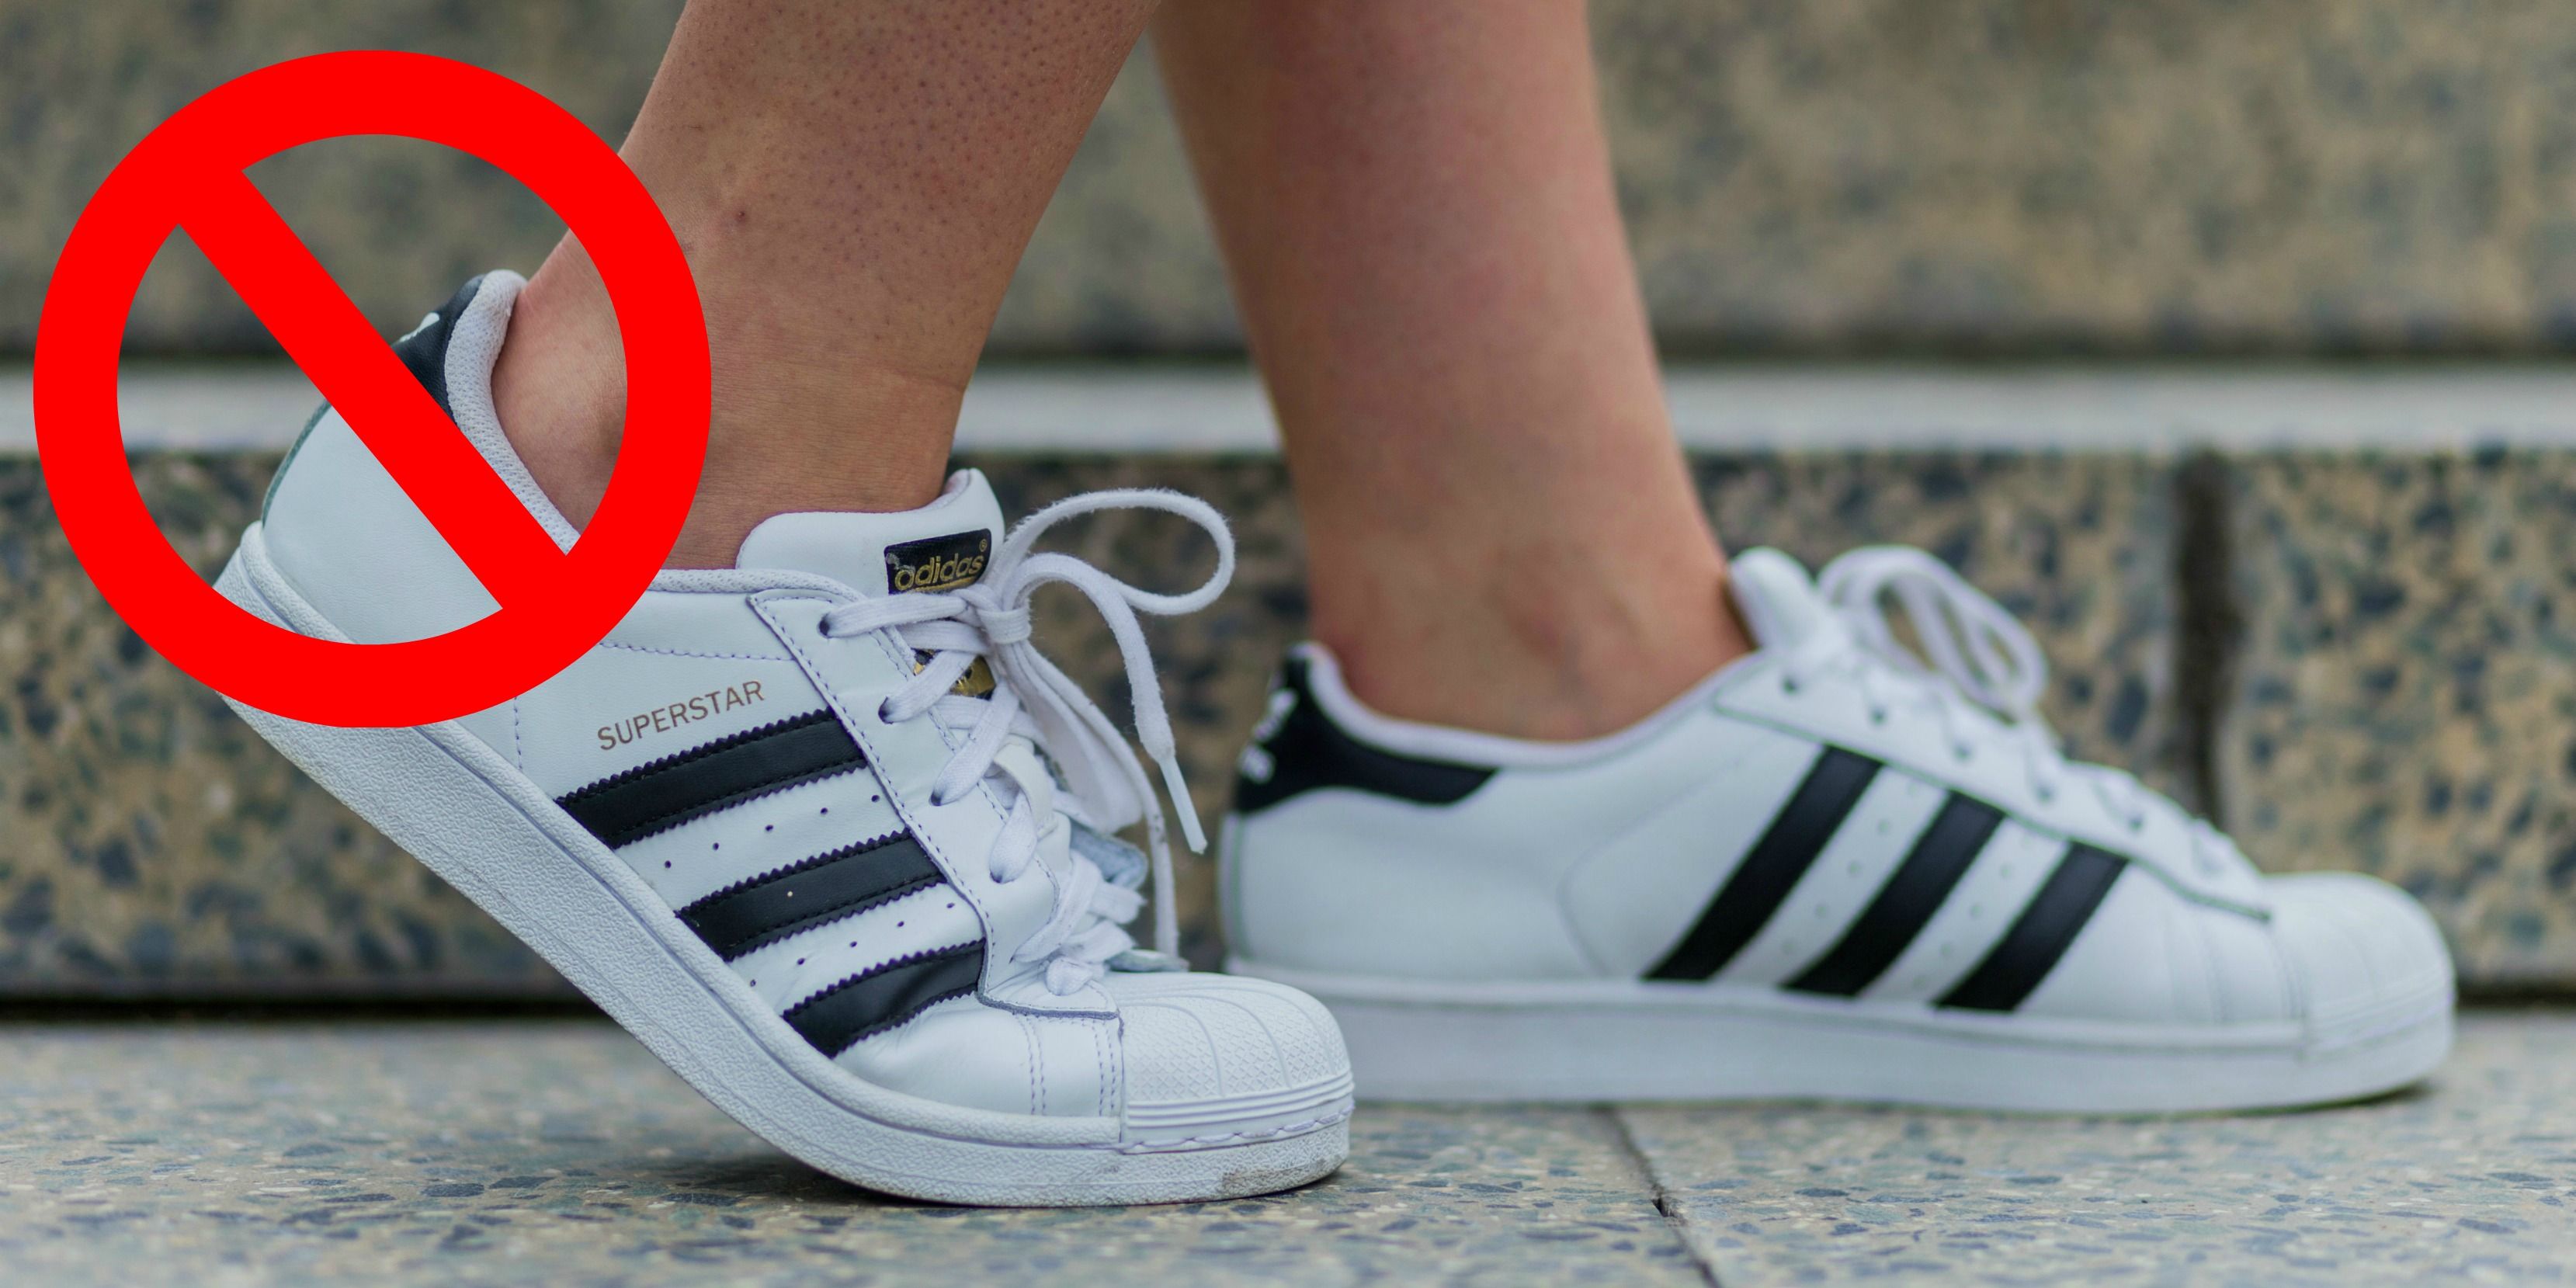 How To Pronounce Adidas In British English